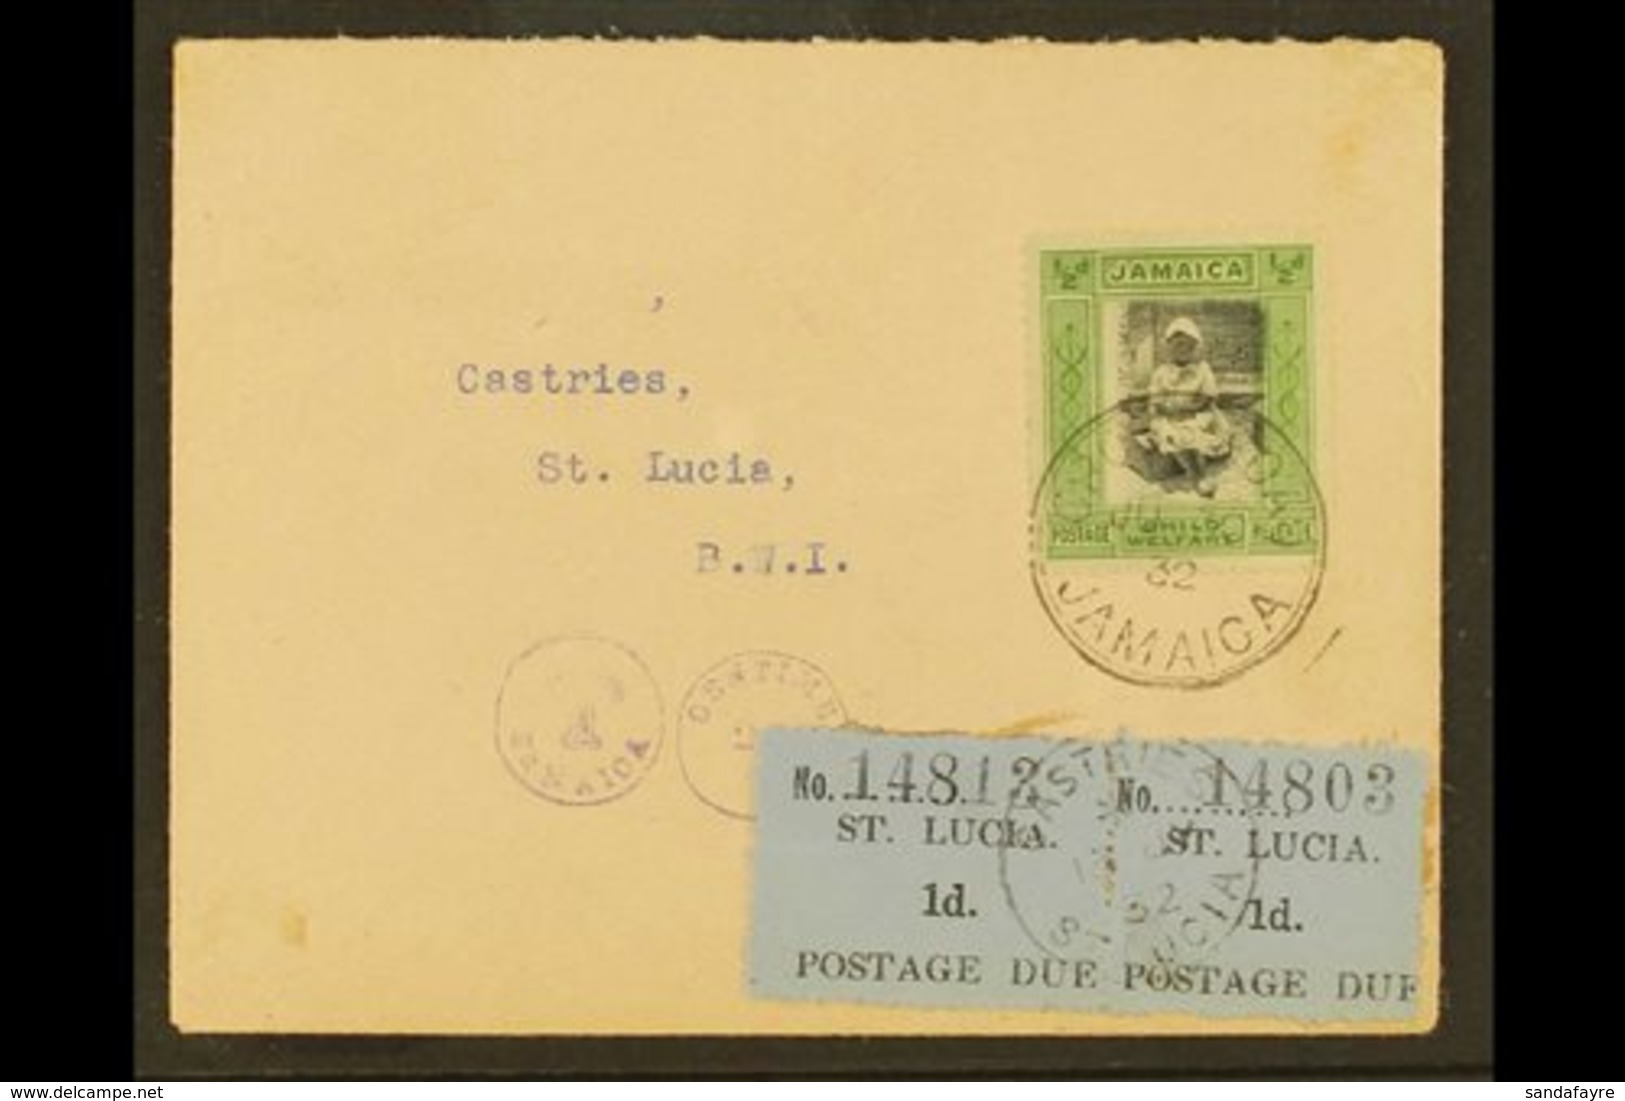 \Y 1932 POSTAGE DUE COVER\Y 1930 (30 June) Cover From Jamaica To Castries Bearing 1923 ½d + ½d Child Welfare Tied By Cro - Ste Lucie (...-1978)